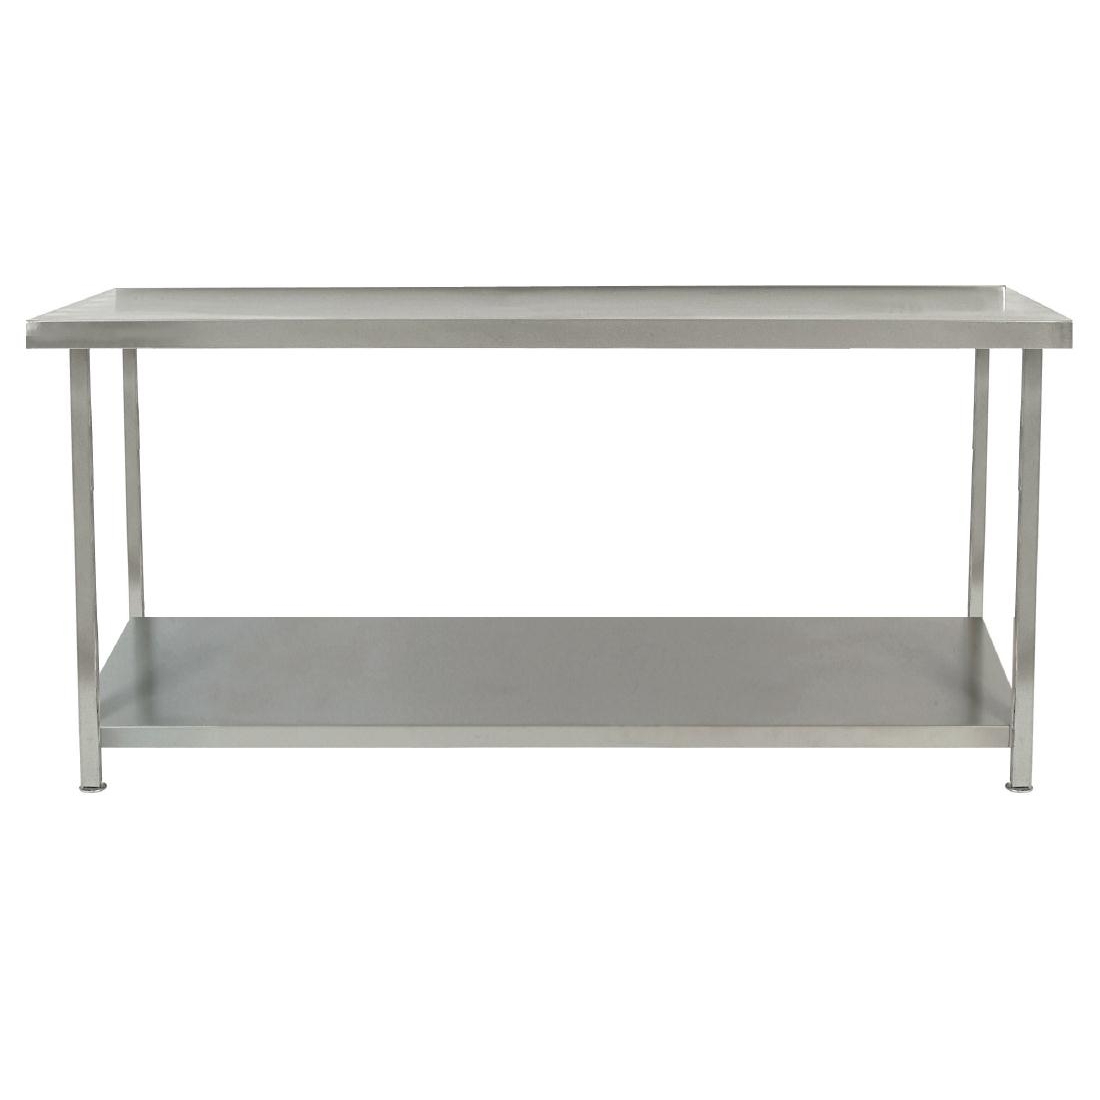 Parry Fully Welded Stainless Steel Centre Table with Undershelf 1900x700mm